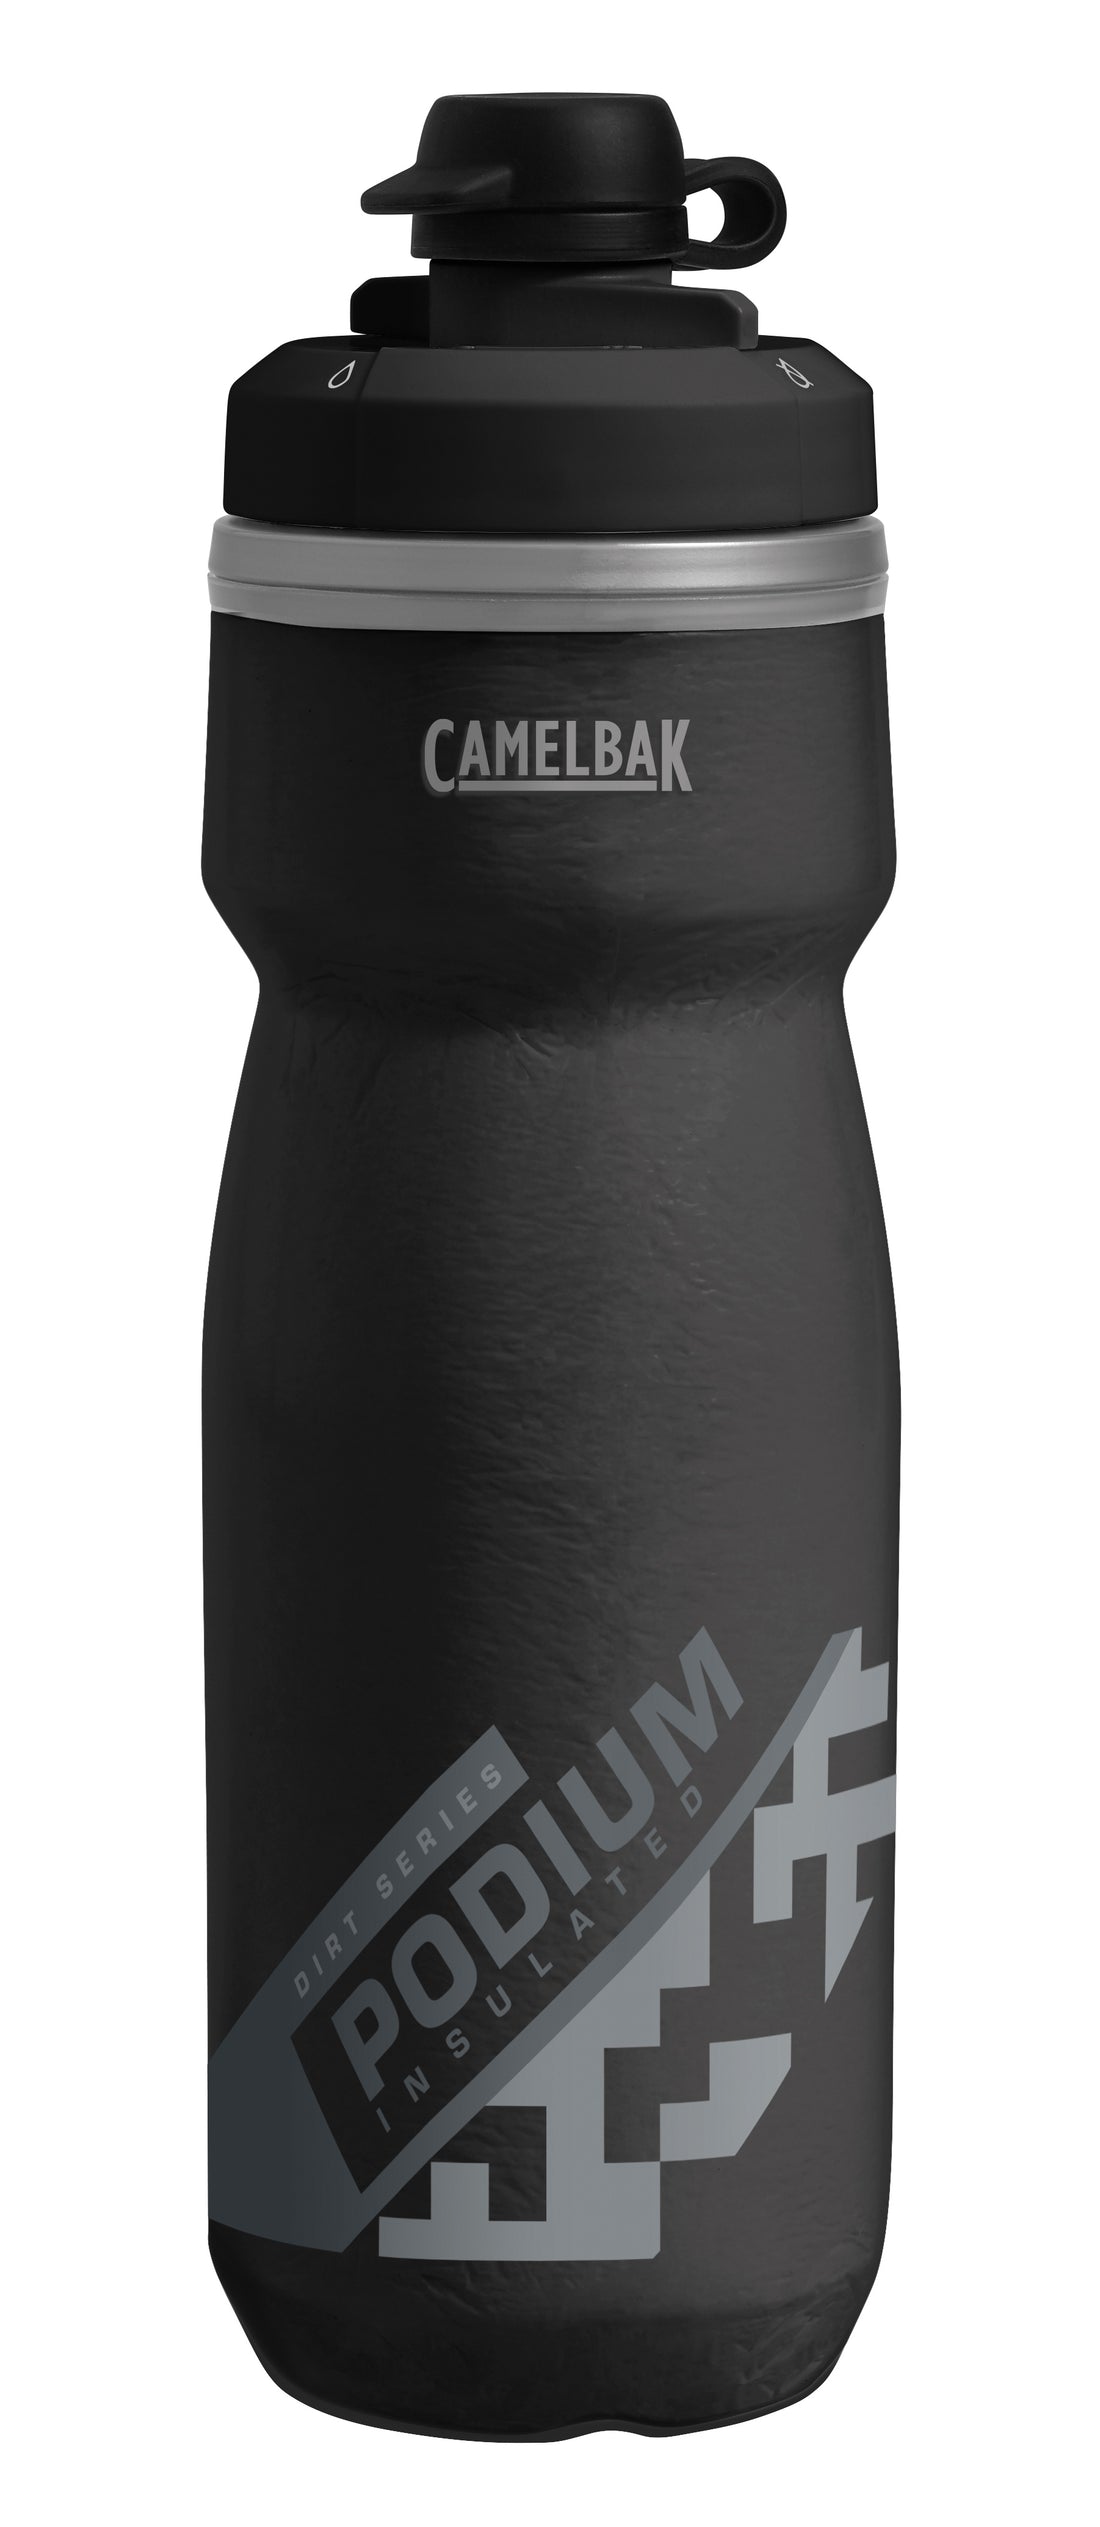 Camelbak|PODIUM®_CHILL_DIRT_SERIES|Cycle_LM